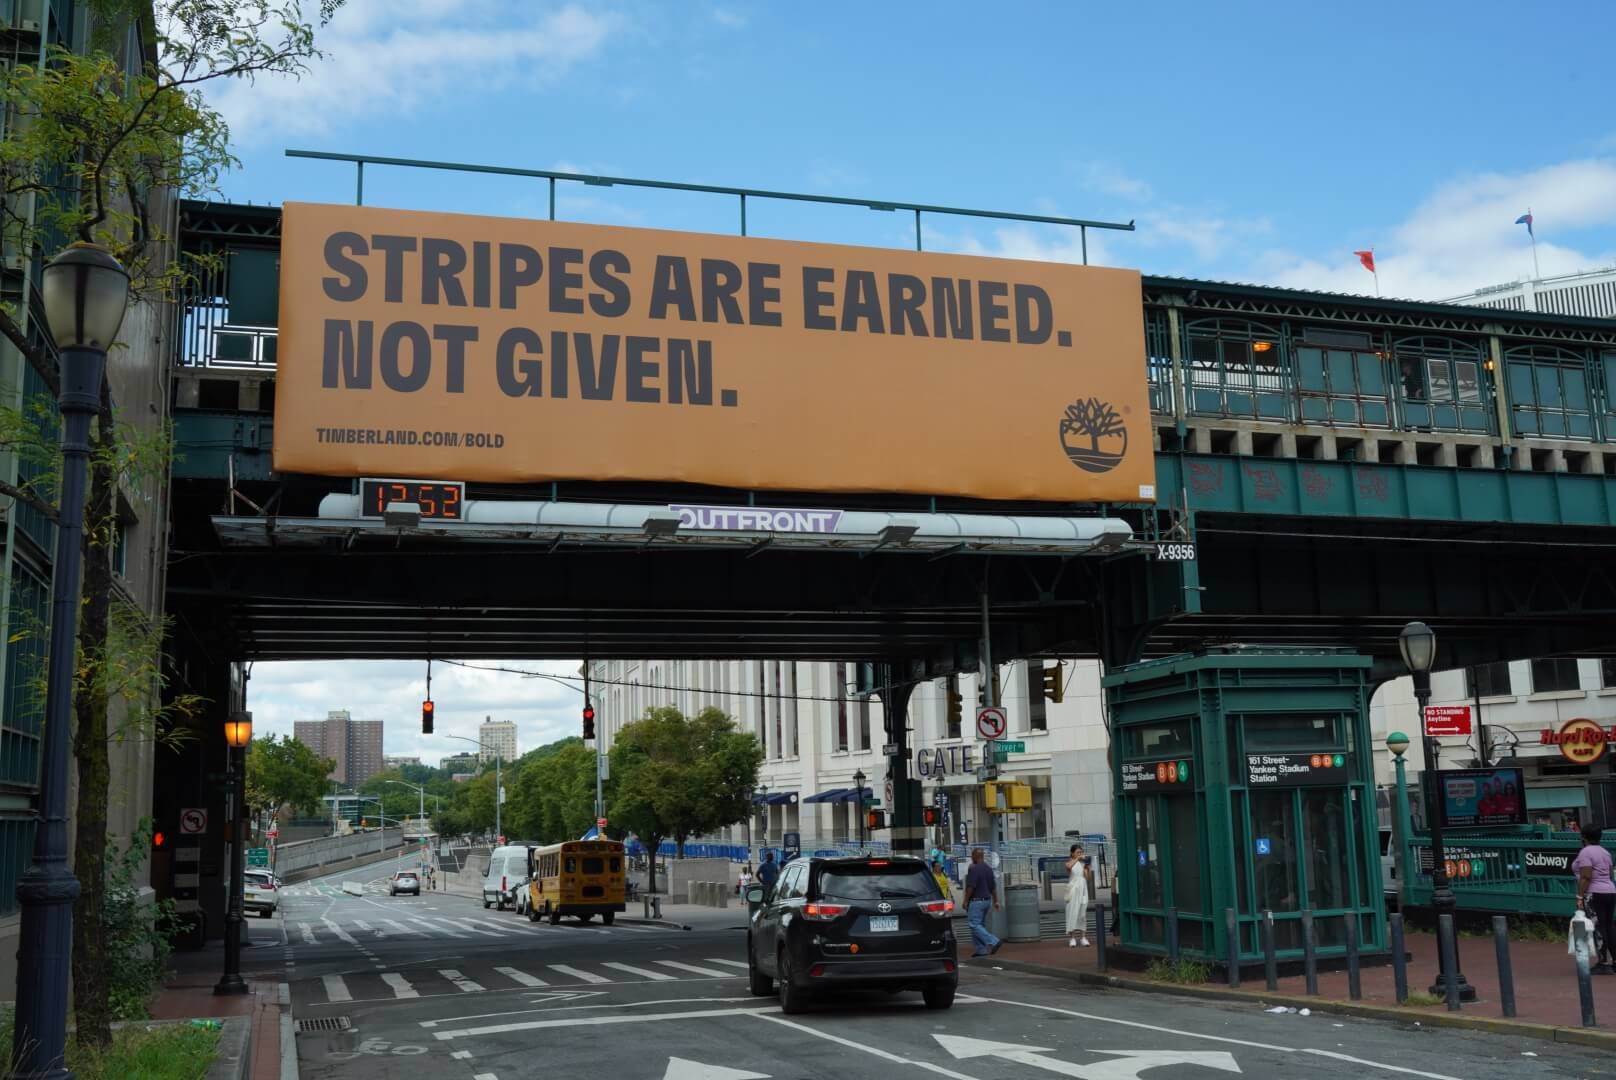 Stripes are earned not given billboard on city street overpass